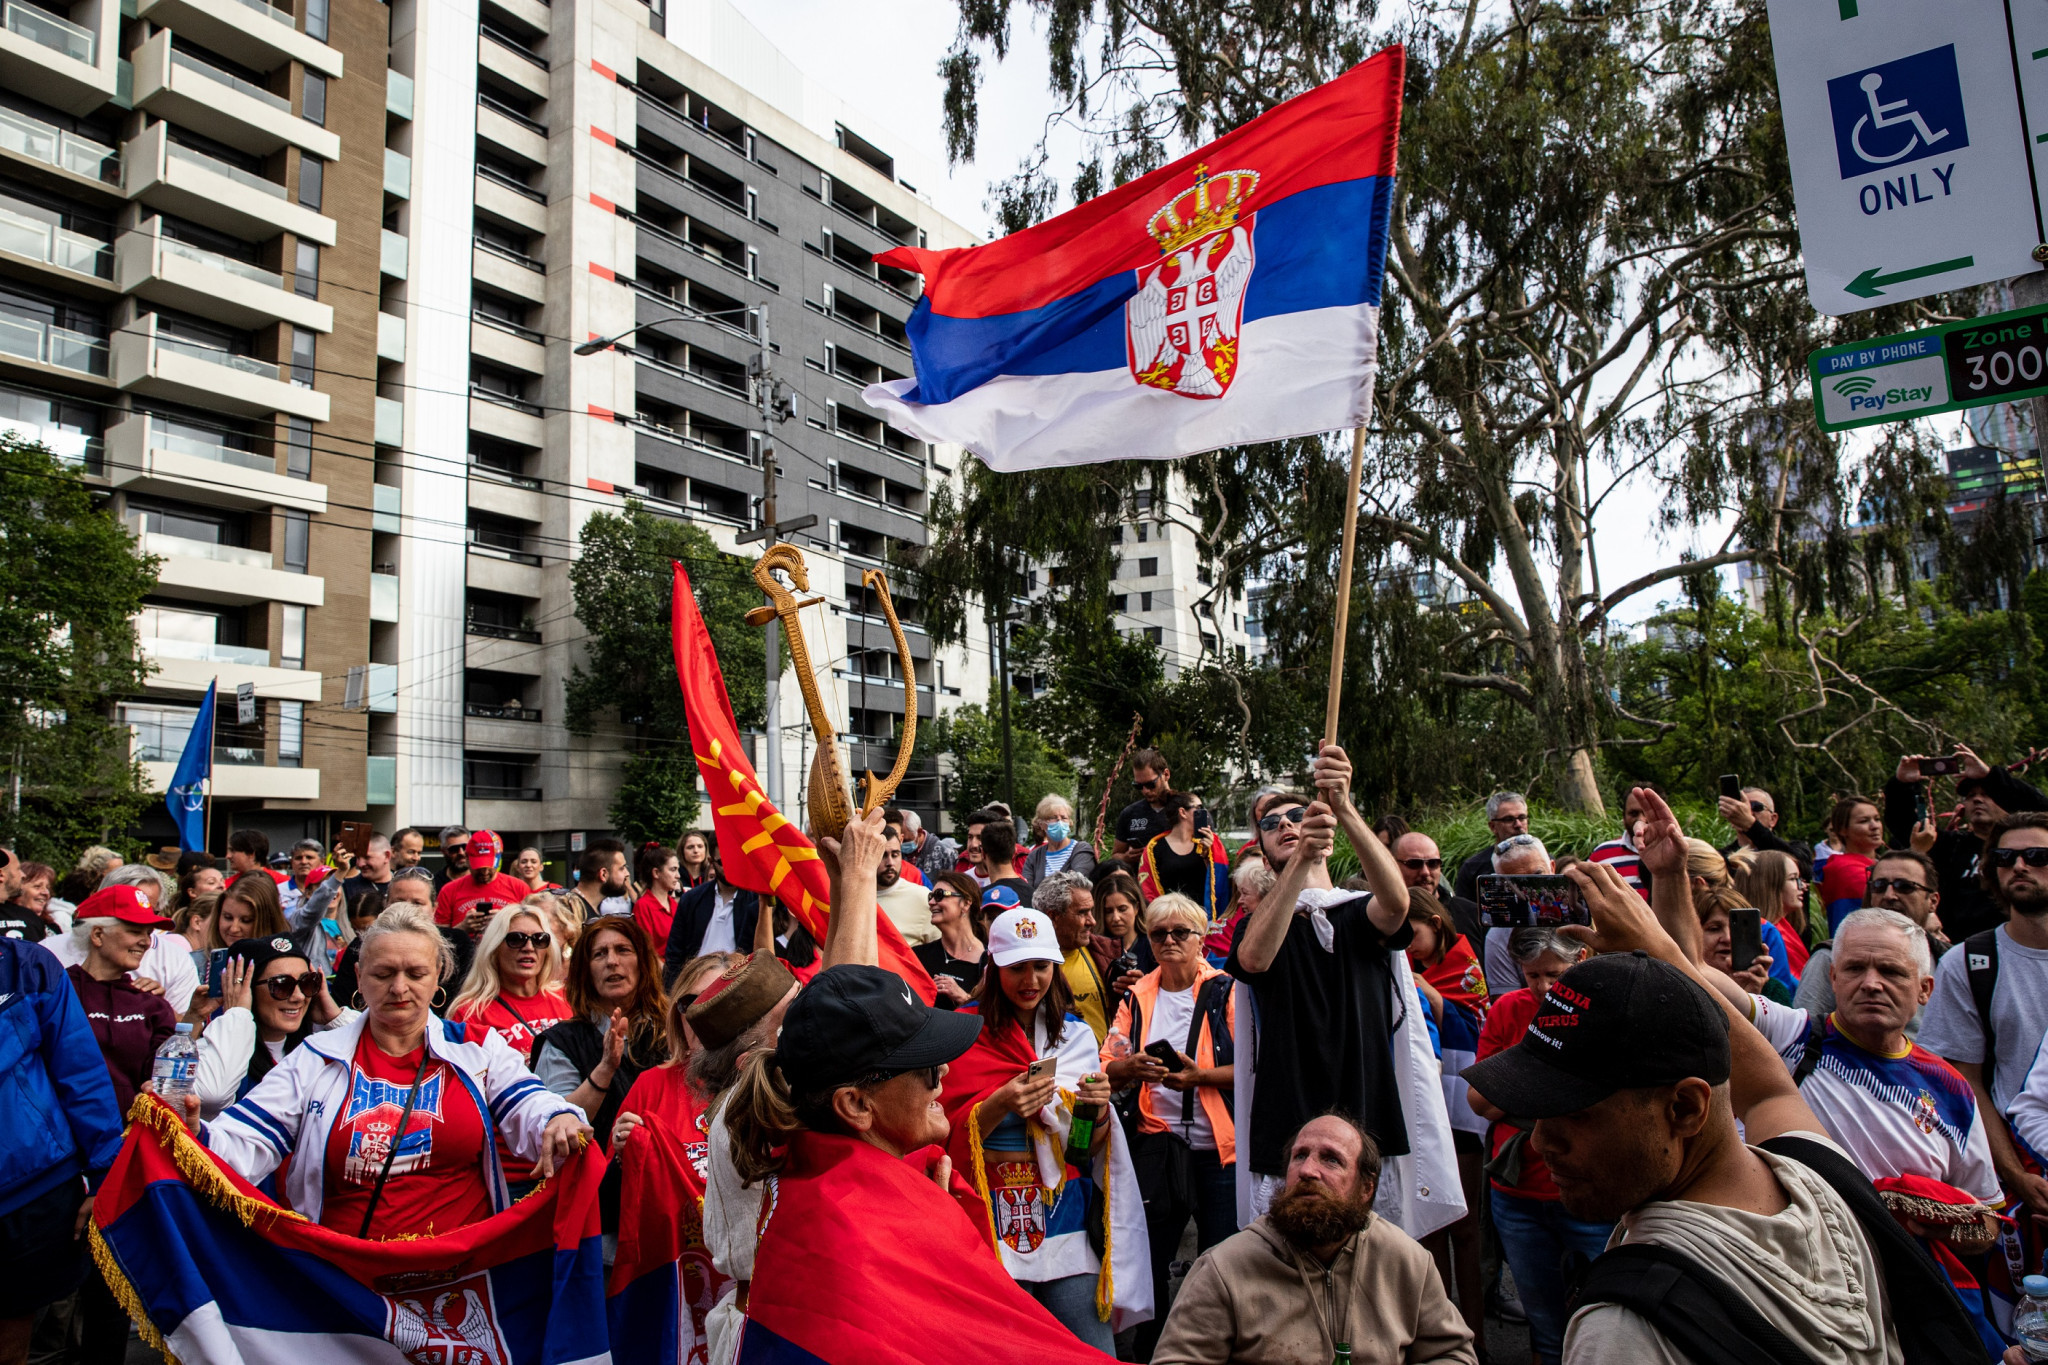 Supporters of Serbia's Novak Djokovic, as well as anti-vaccine demonstrators and refugee advocates, have gathered outside the hotel where he is being detained in Melbourne ©Getty Images